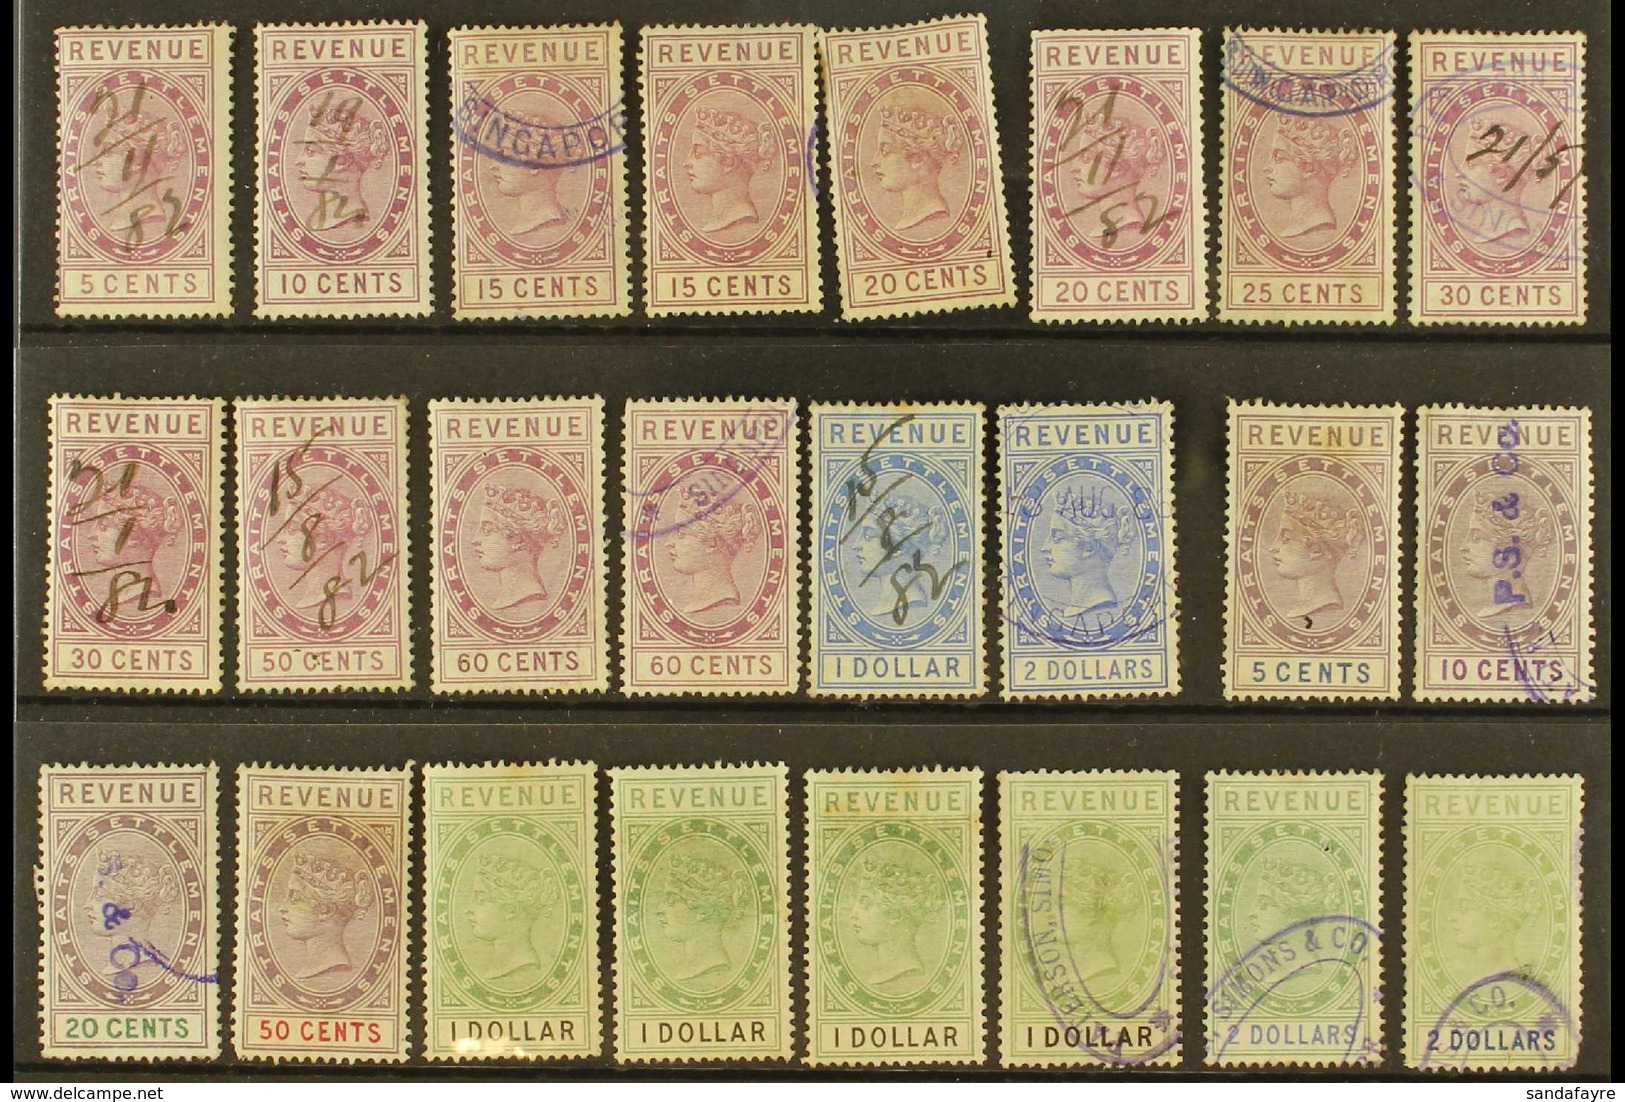 REVENUE 1882-1893 USED SELECTION Presented On A Stock Card That Includes 1882 Range With Most Values To $2 & 1888-1893 R - Straits Settlements